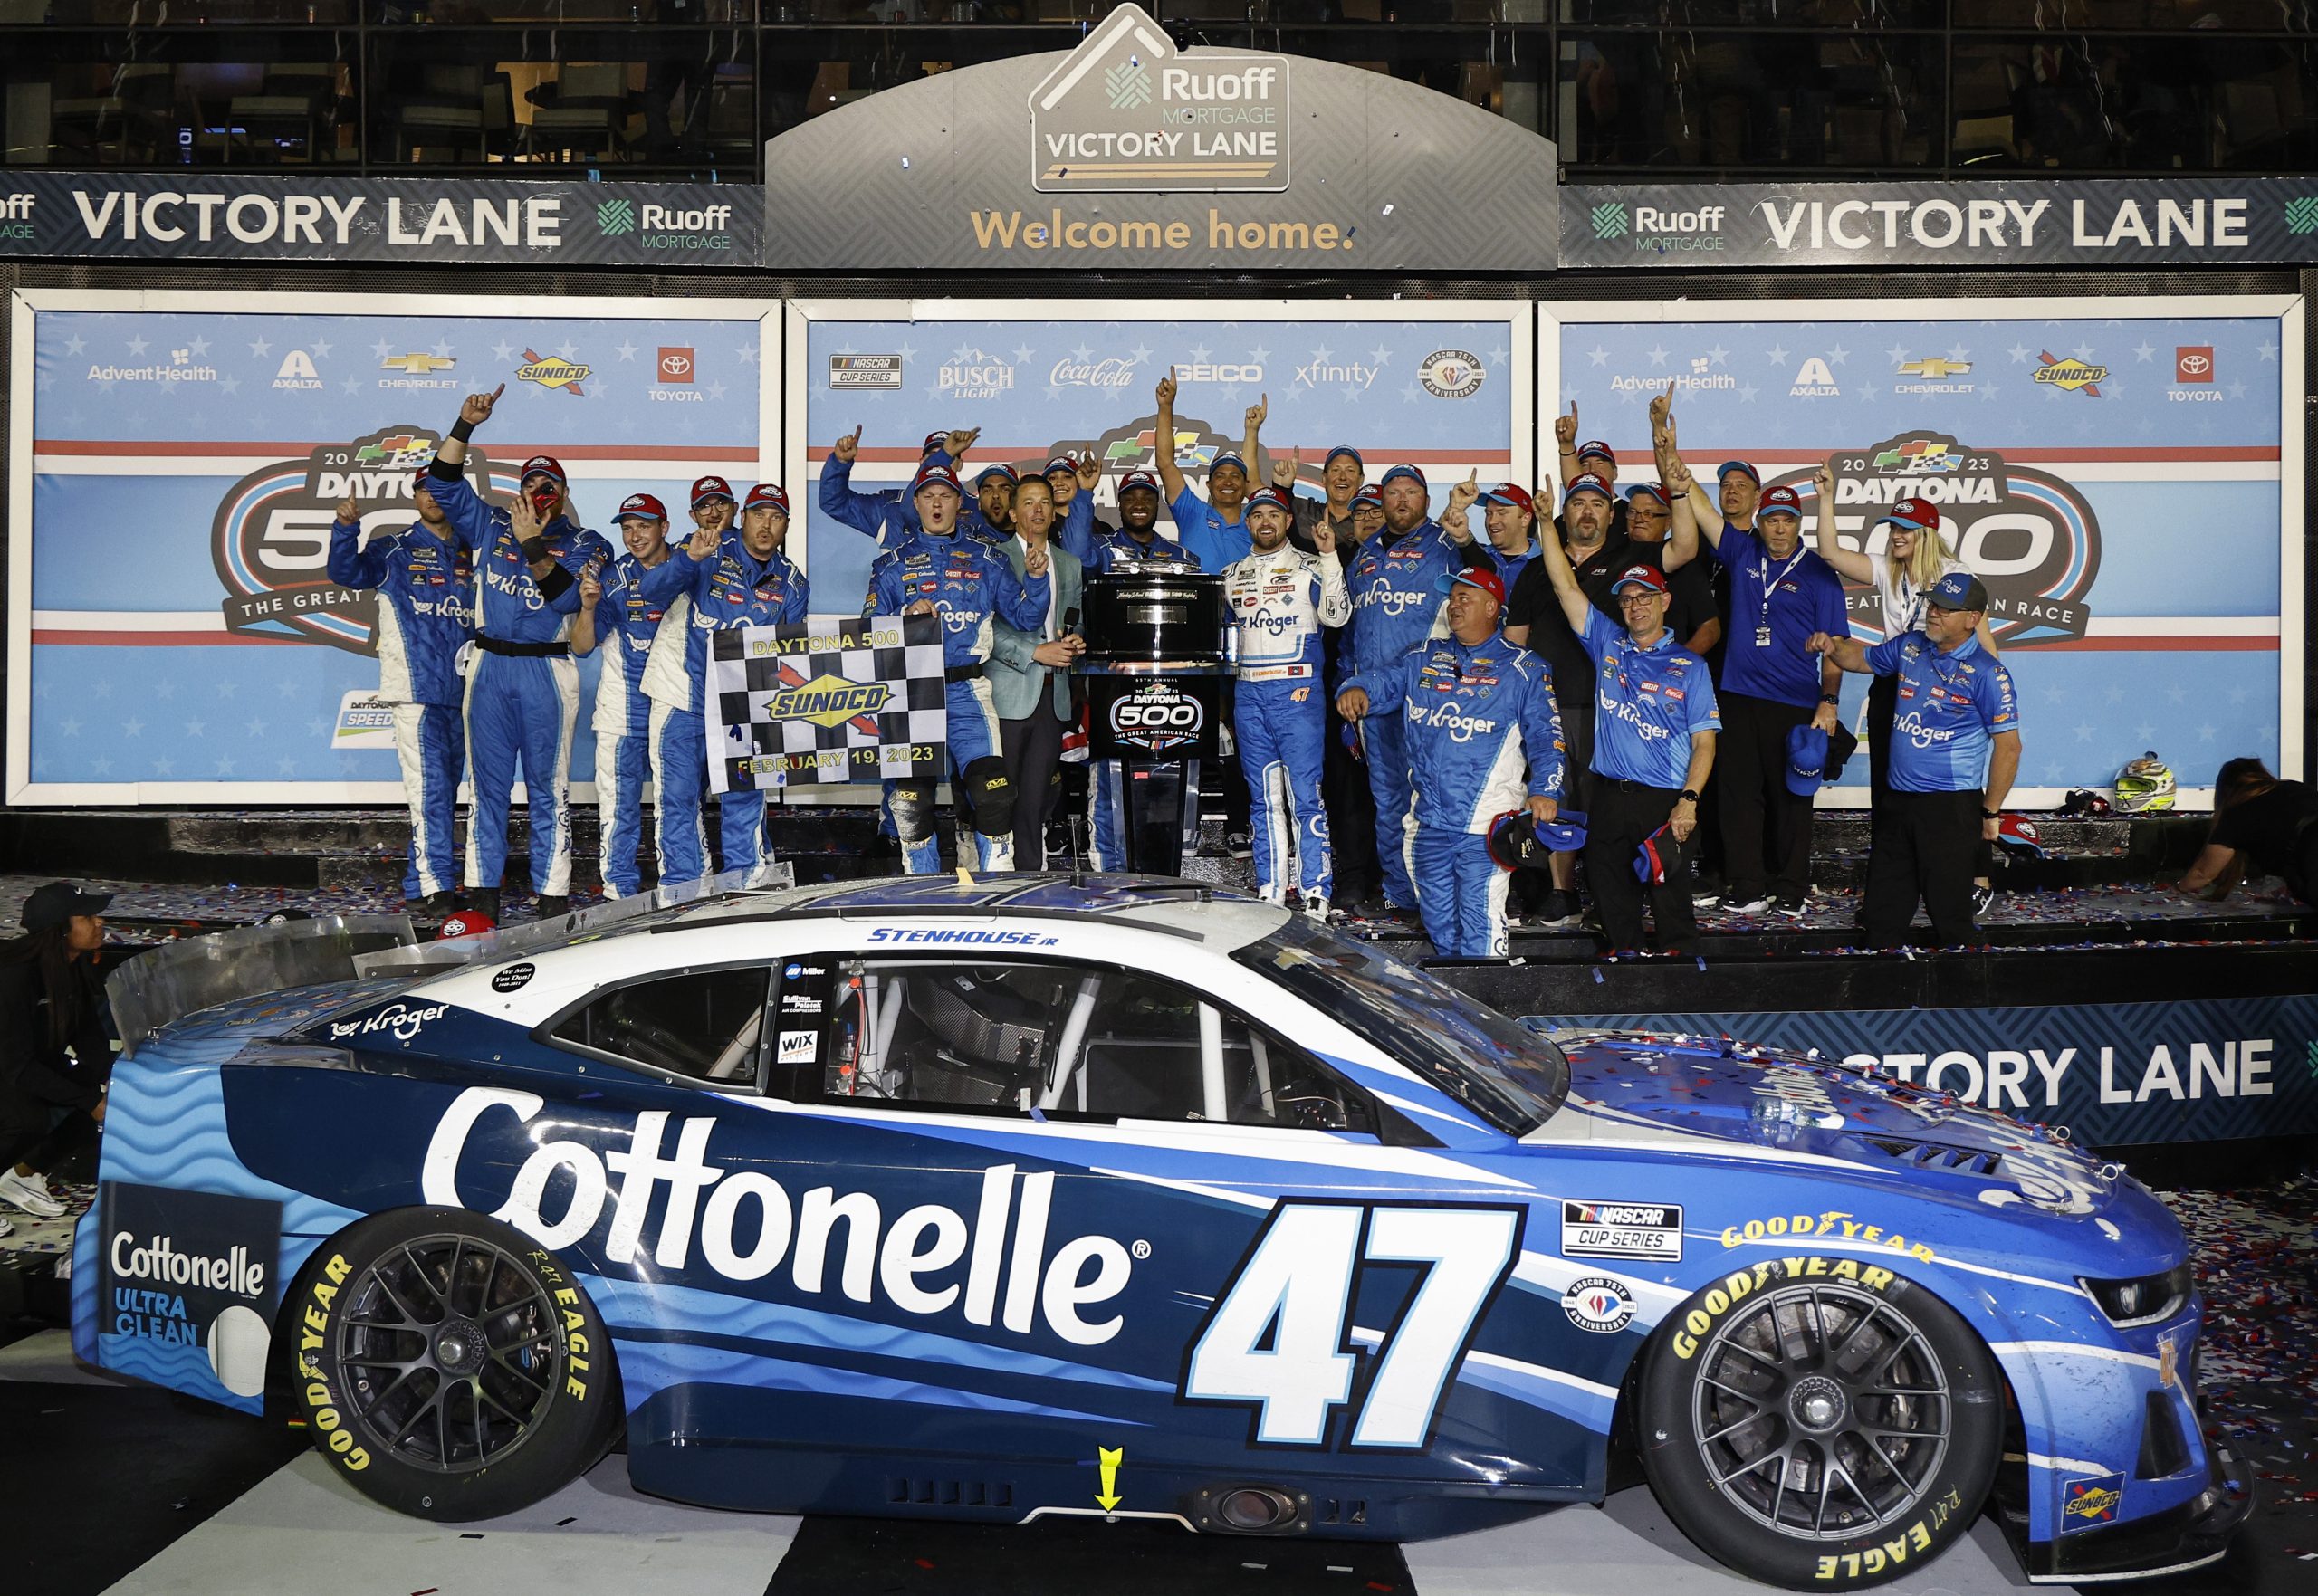 DAYTONA BEACH, FLORIDA - FEBRUARY 19: Ricky Stenhouse Jr., driver of the #47 Kroger/Cottonelle Chevrolet, and crew celebrate in victory lane after winning the NASCAR Cup Series 65th Annual Daytona 500 at Daytona International Speedway on February 19, 2023 in Daytona Beach, Florida. (Photo by Chris Graythen/Getty Images)